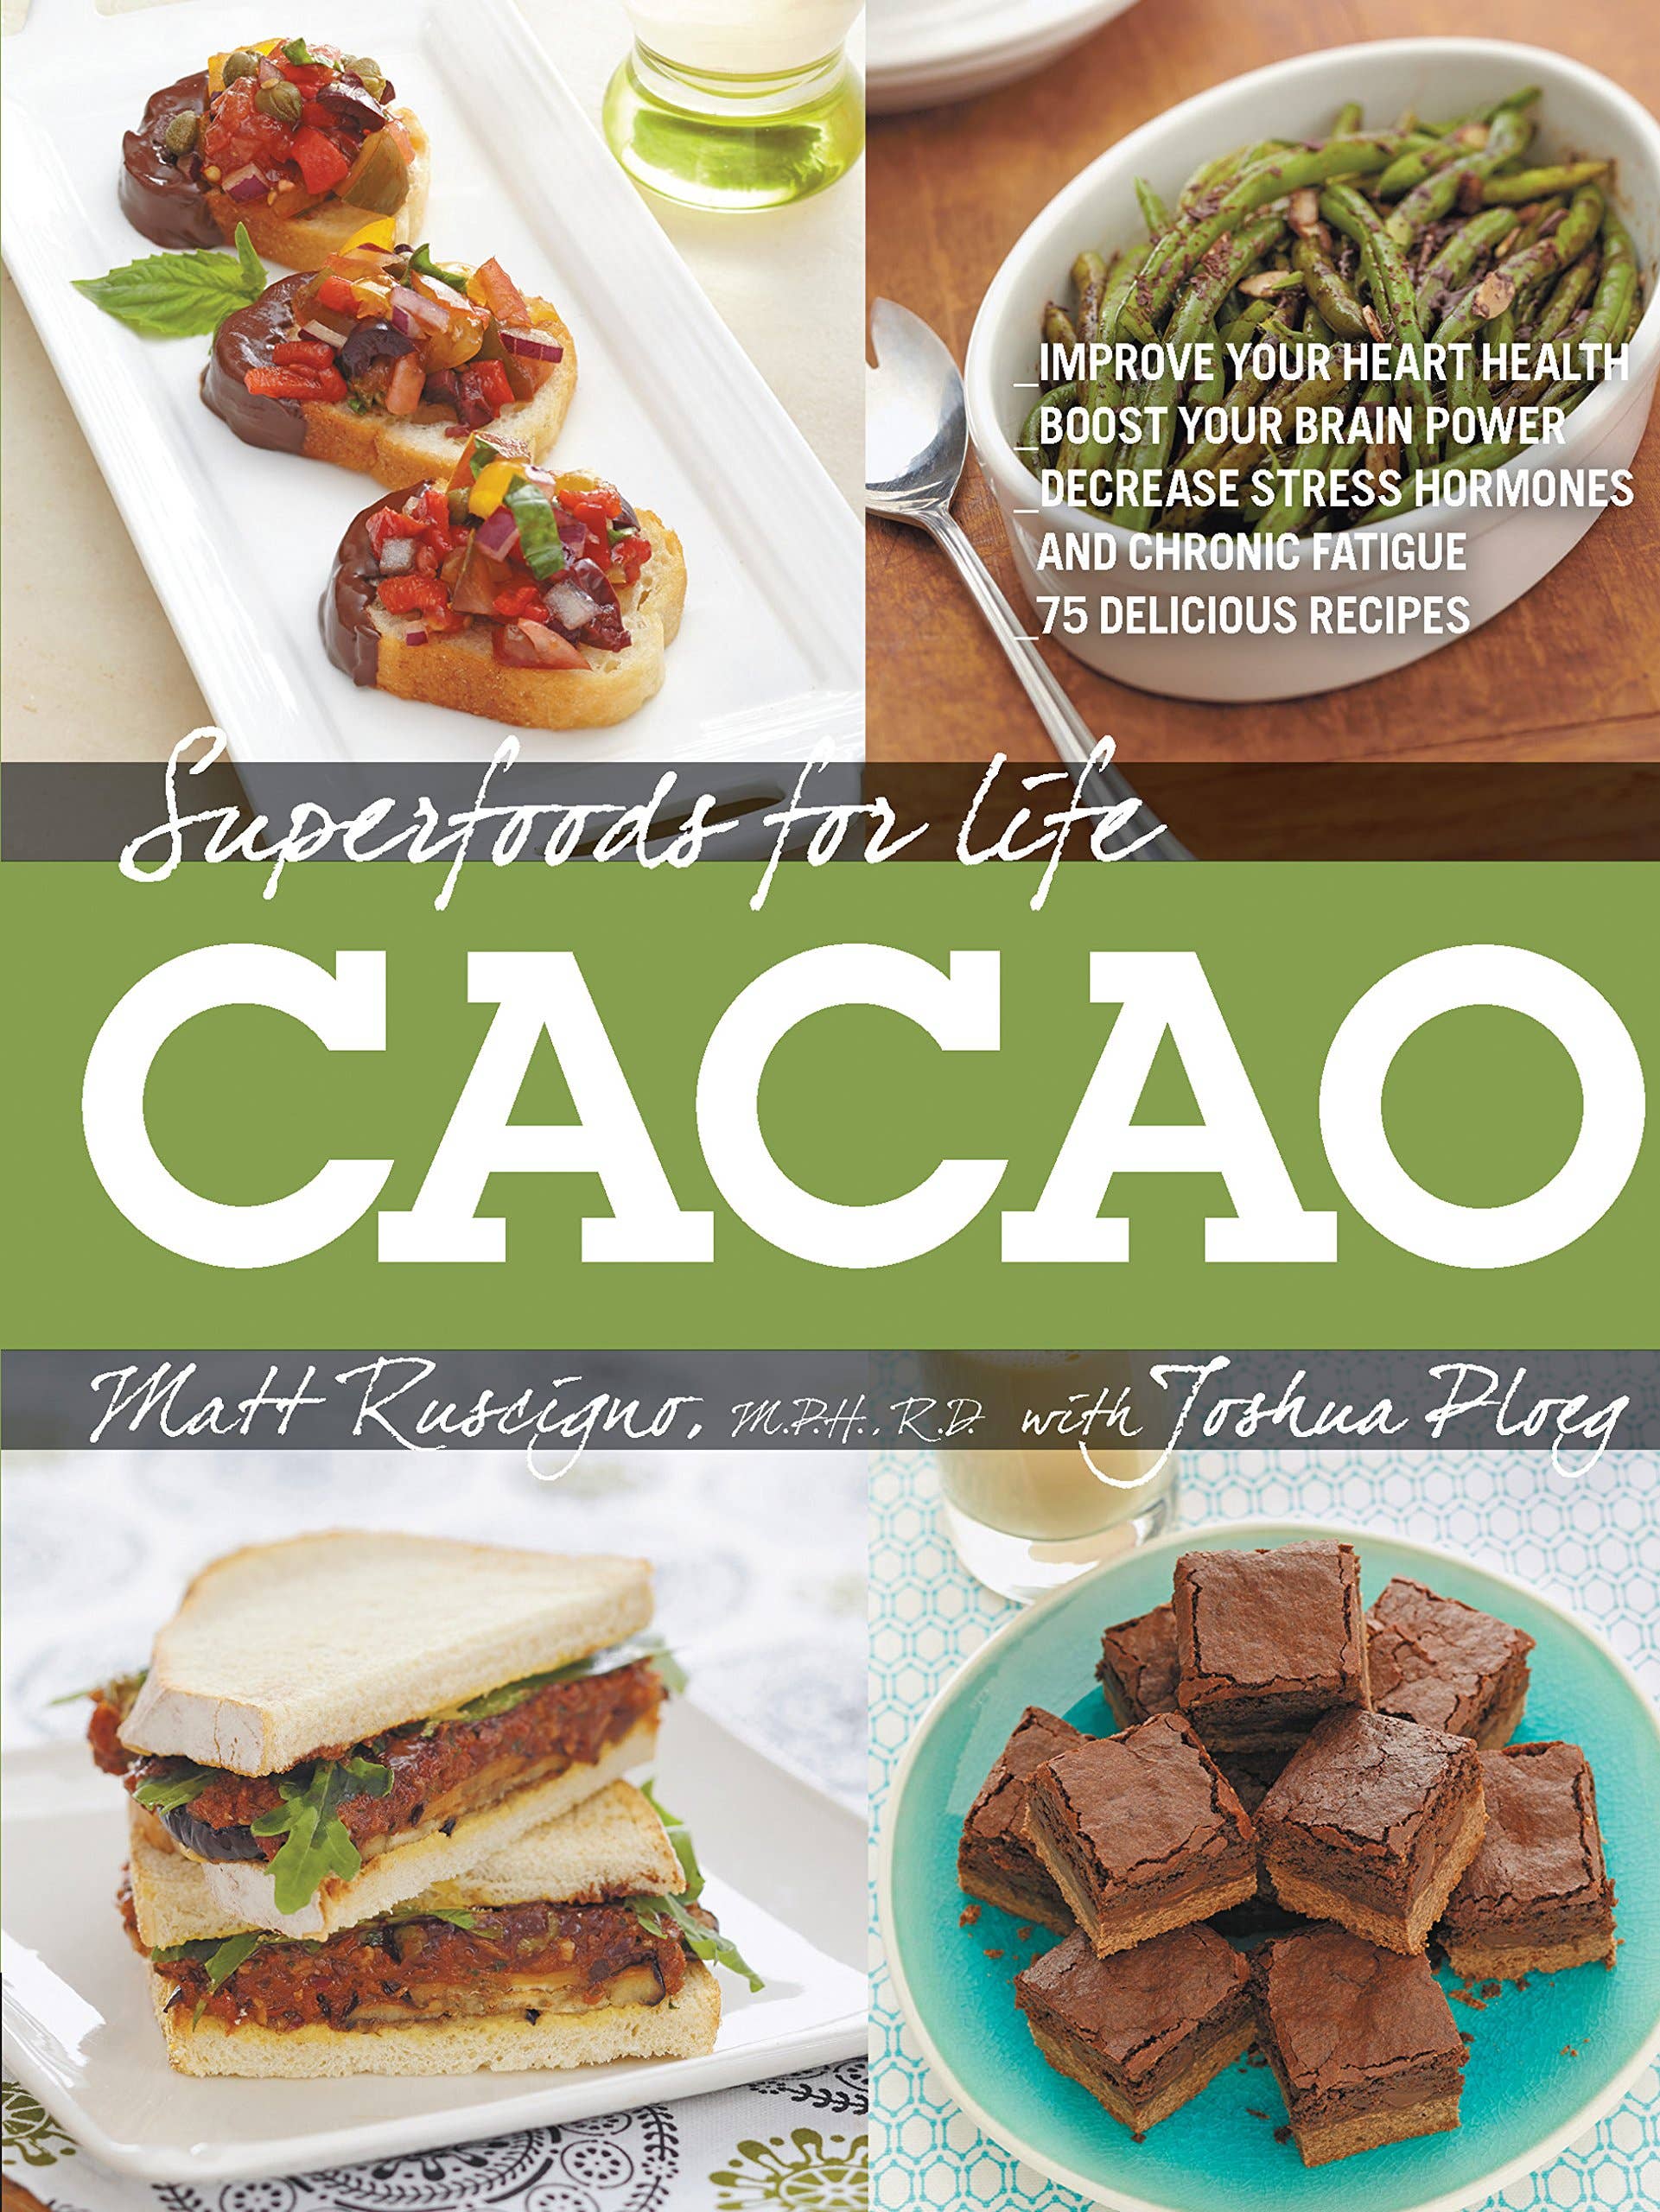 Microcosm Publishing & Distribution - Cacao: Superfoods for Life